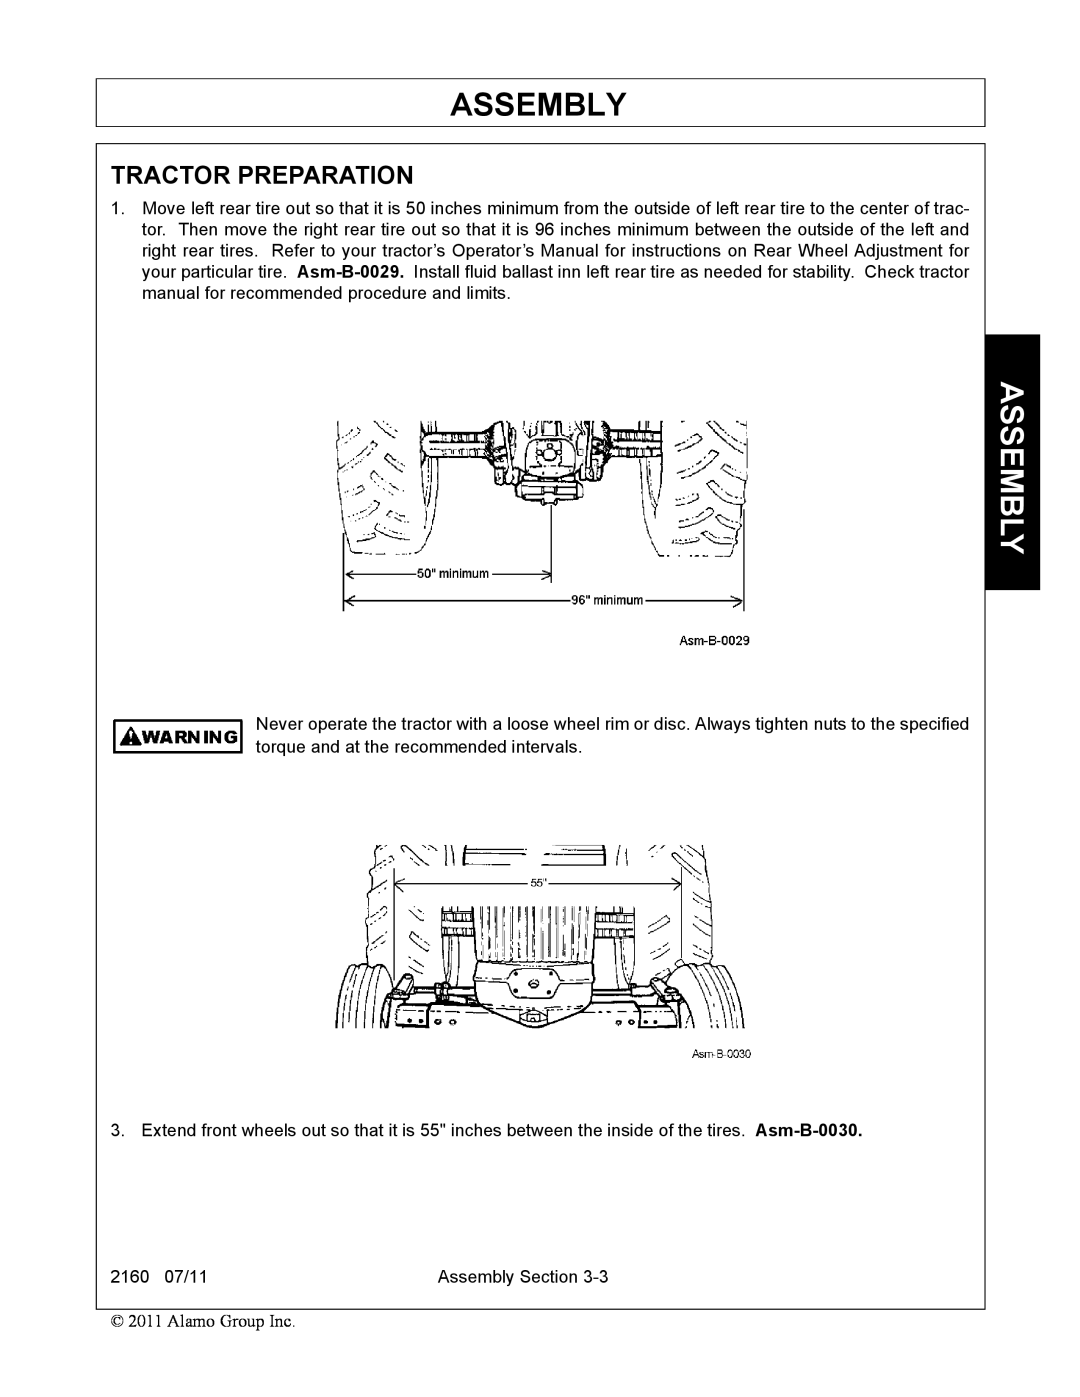 Servis-Rhino 2160 manual Tractor Preparation, Assembly 